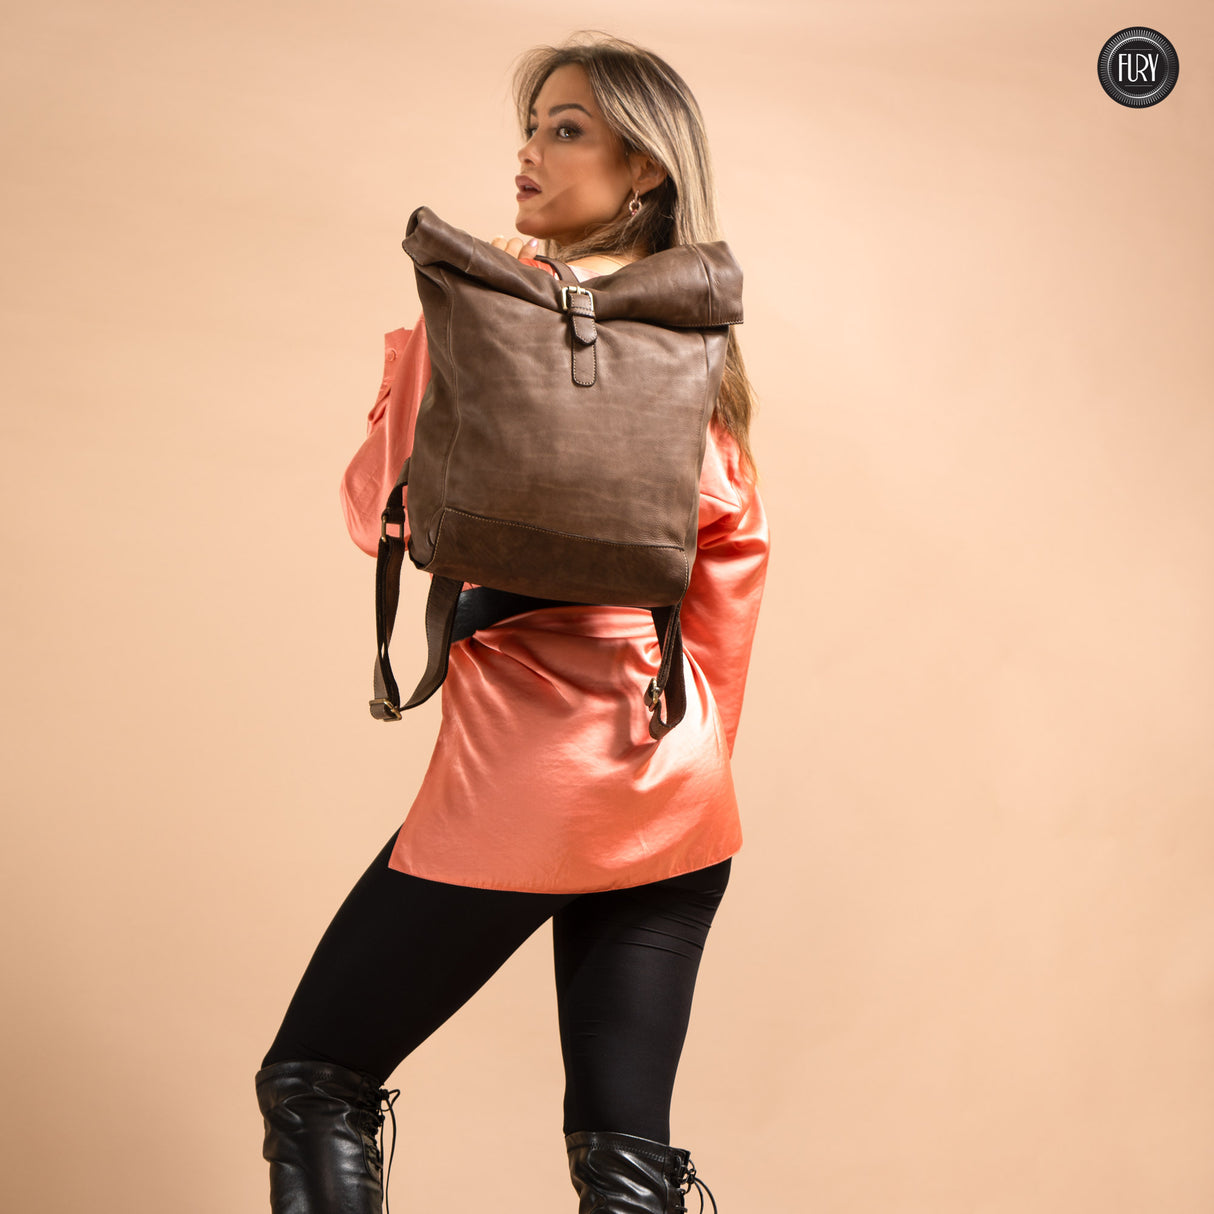 Ettore leather backpack